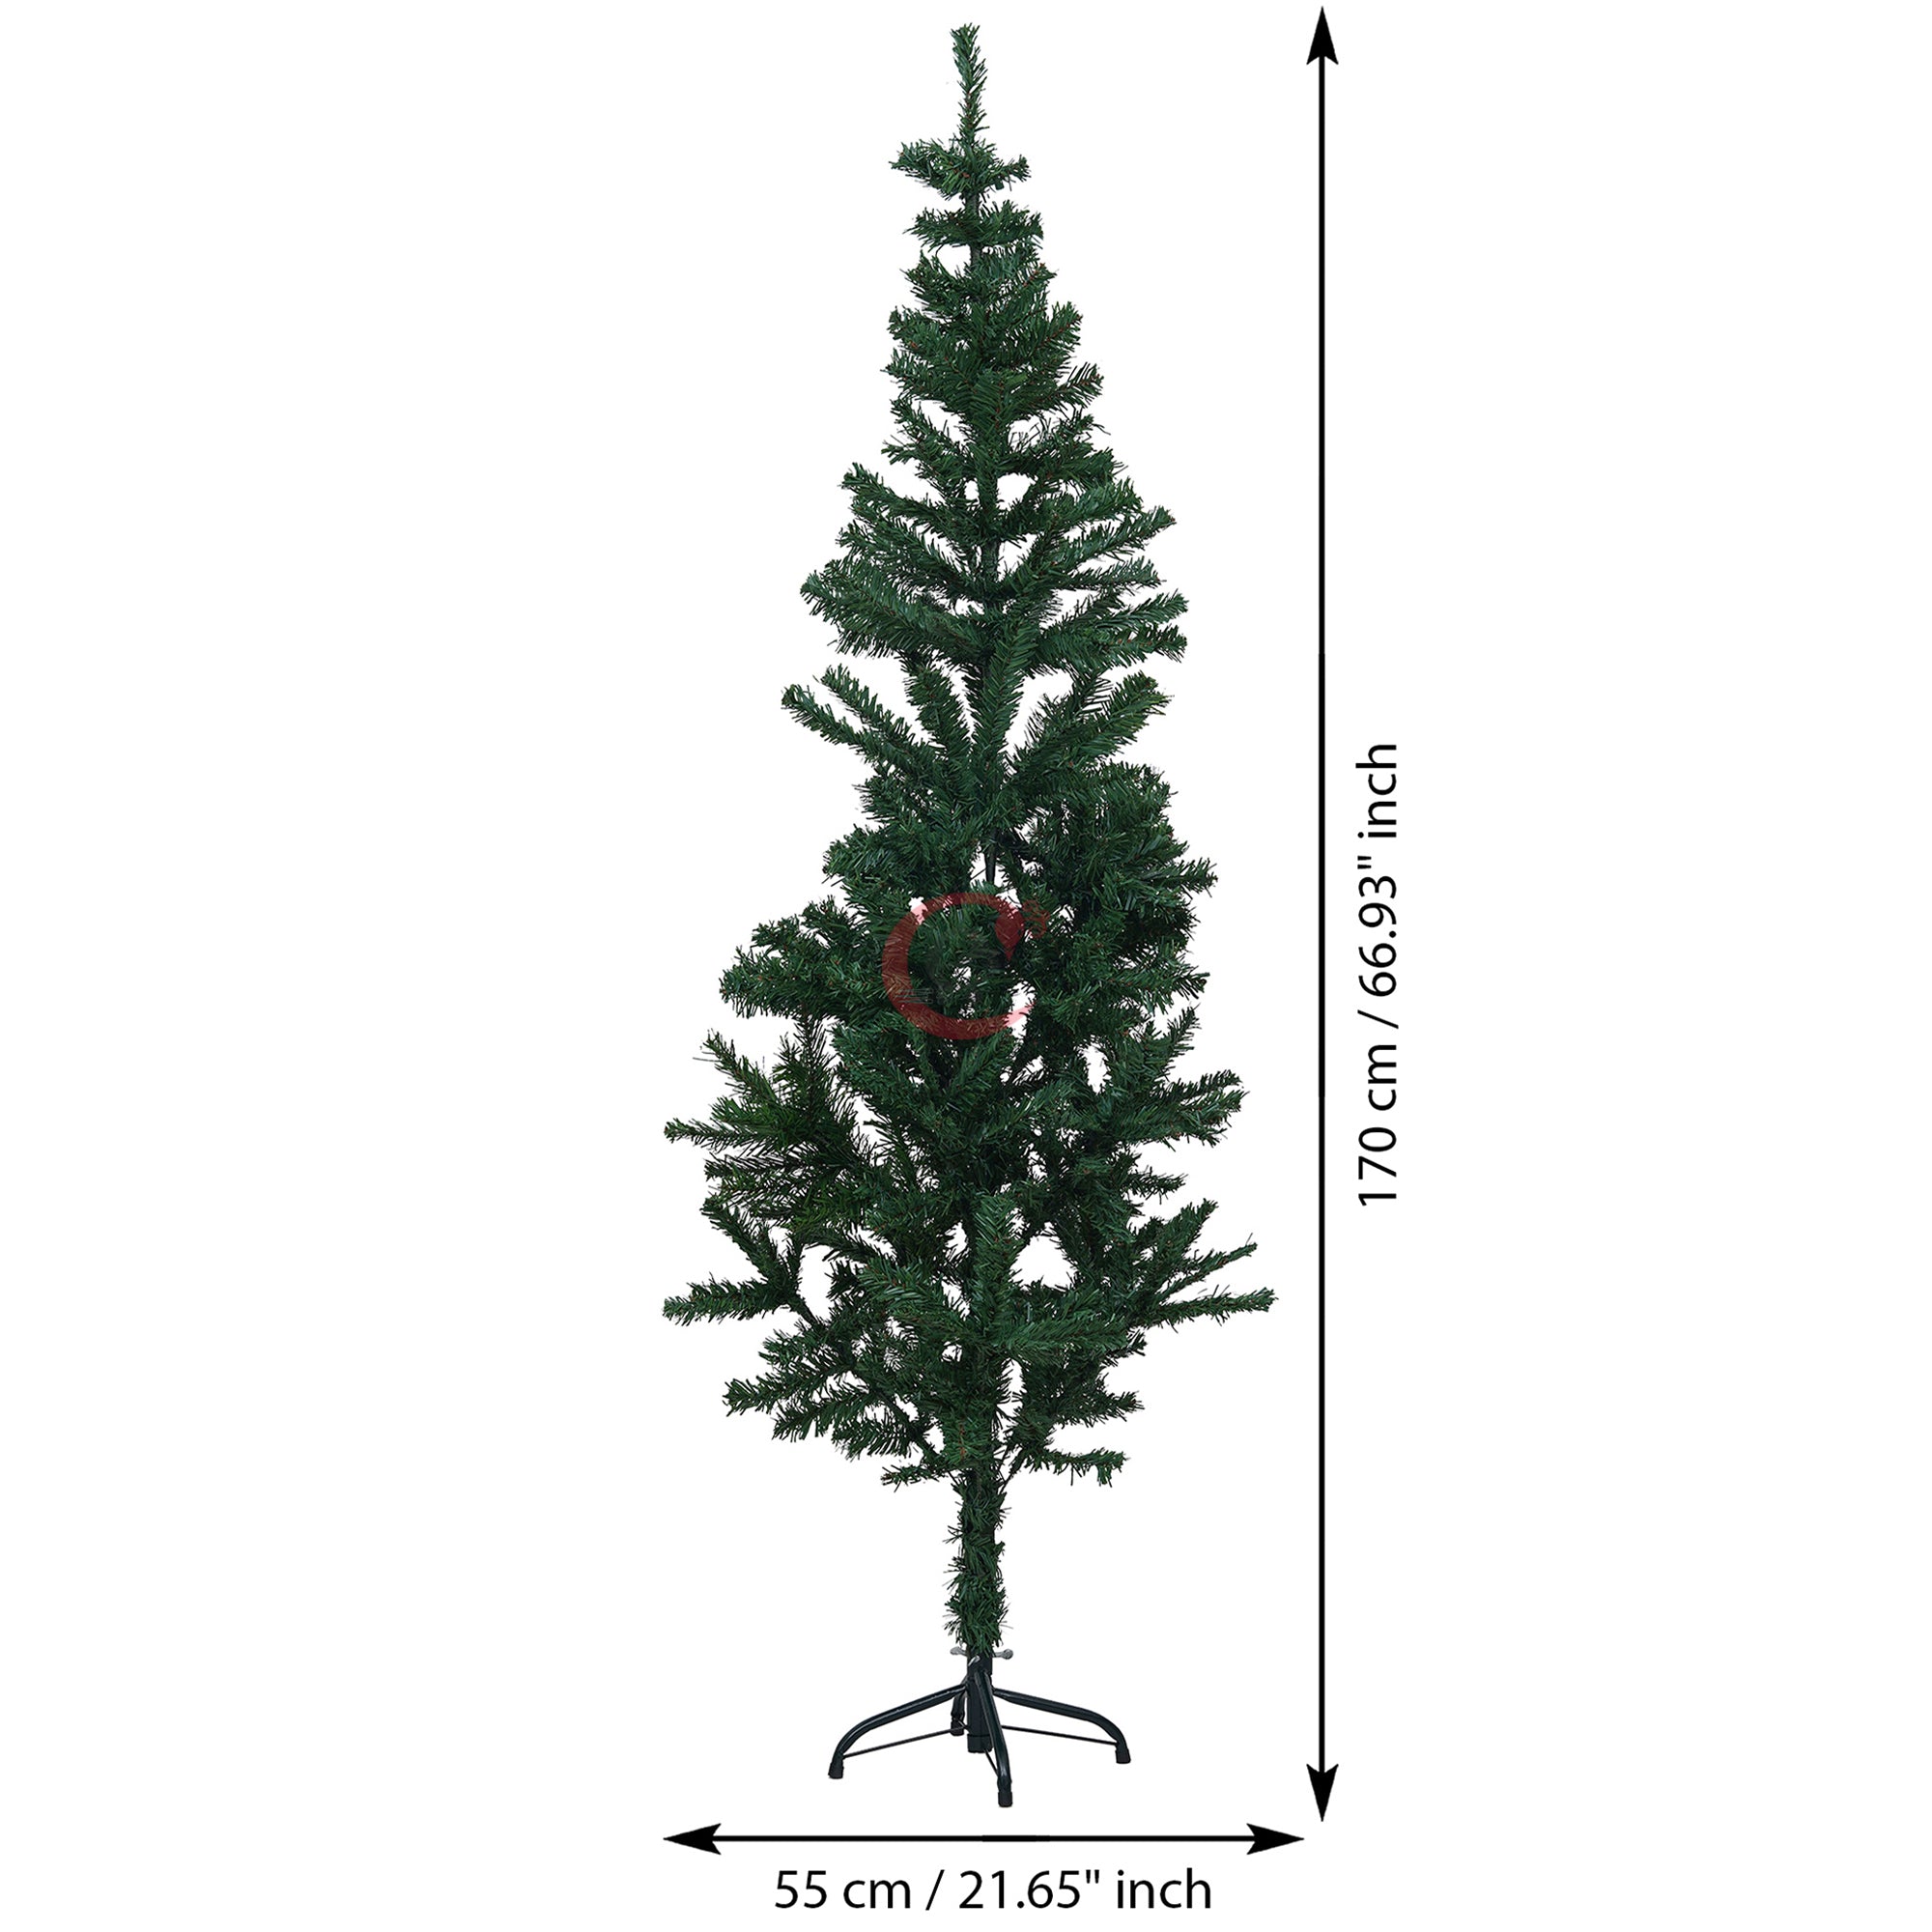 eCraftIndia 6 Feet Green Artificial Christmas Tree Xmas Pine Tree with Stand and 100 Christmas Decoration Ornaments Props - Merry Christmas Decoration Item for Home, Office, and Church 3